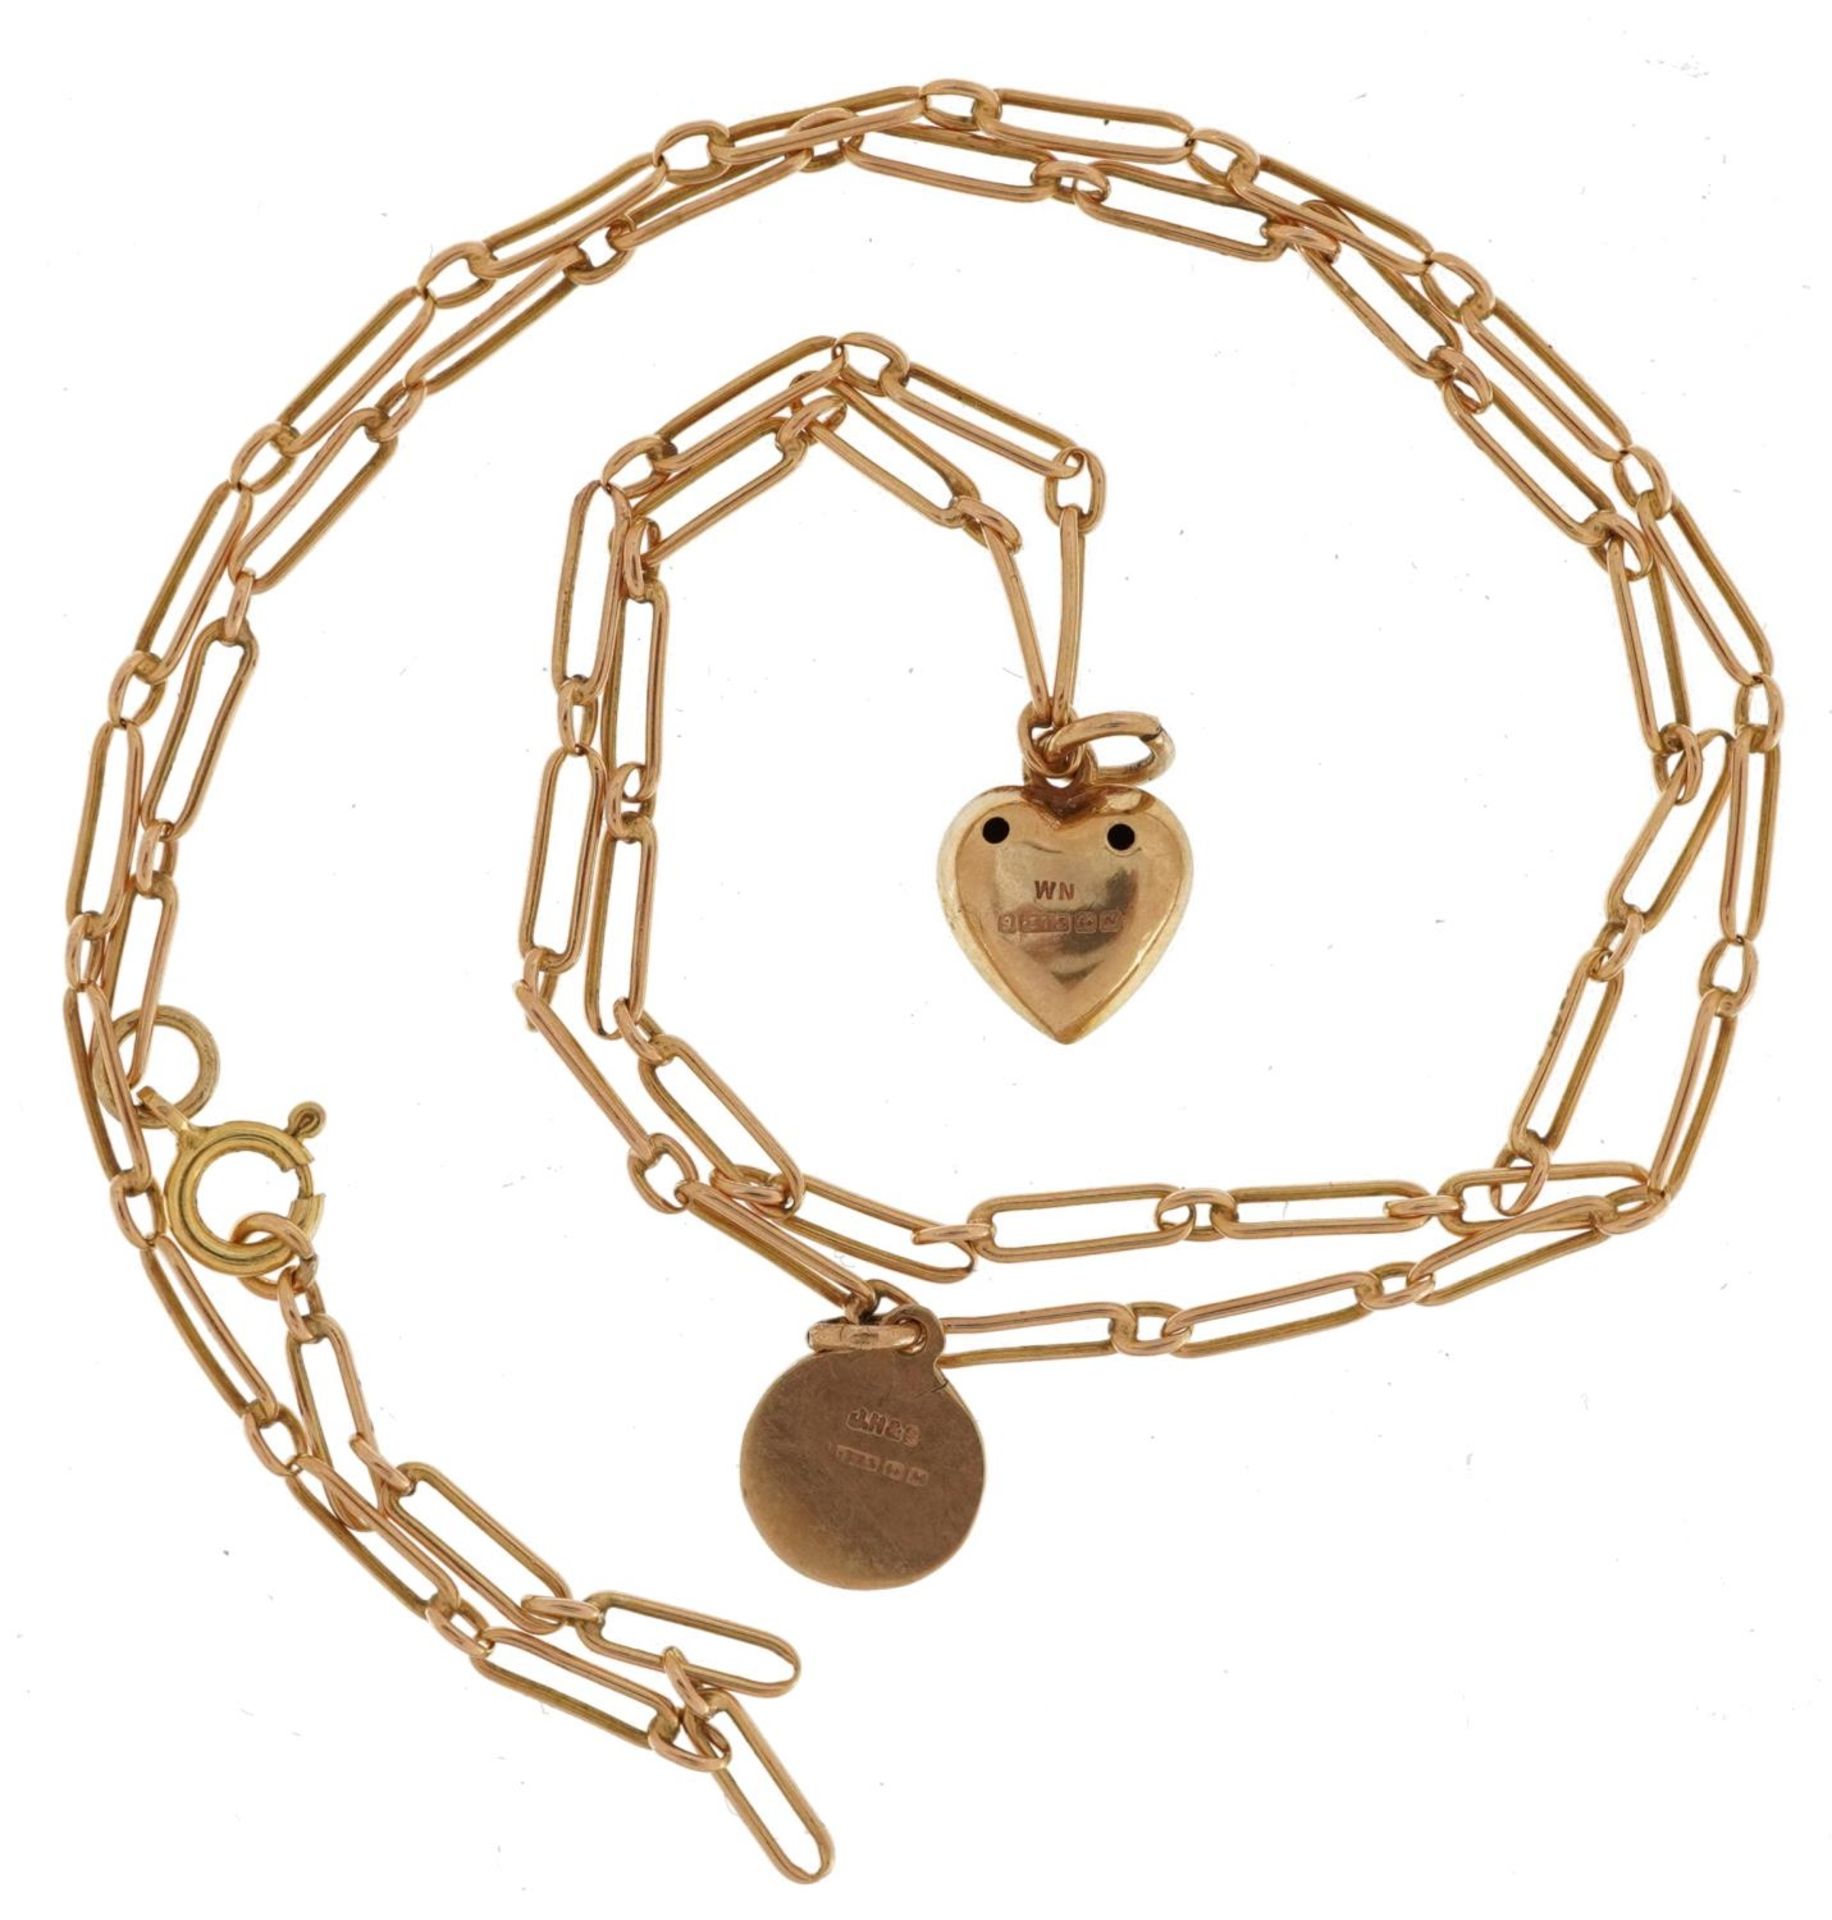 9ct gold long link necklace with a 9ct gold love heart pendant set with a clear stone and a 9ct gold - Image 3 of 5